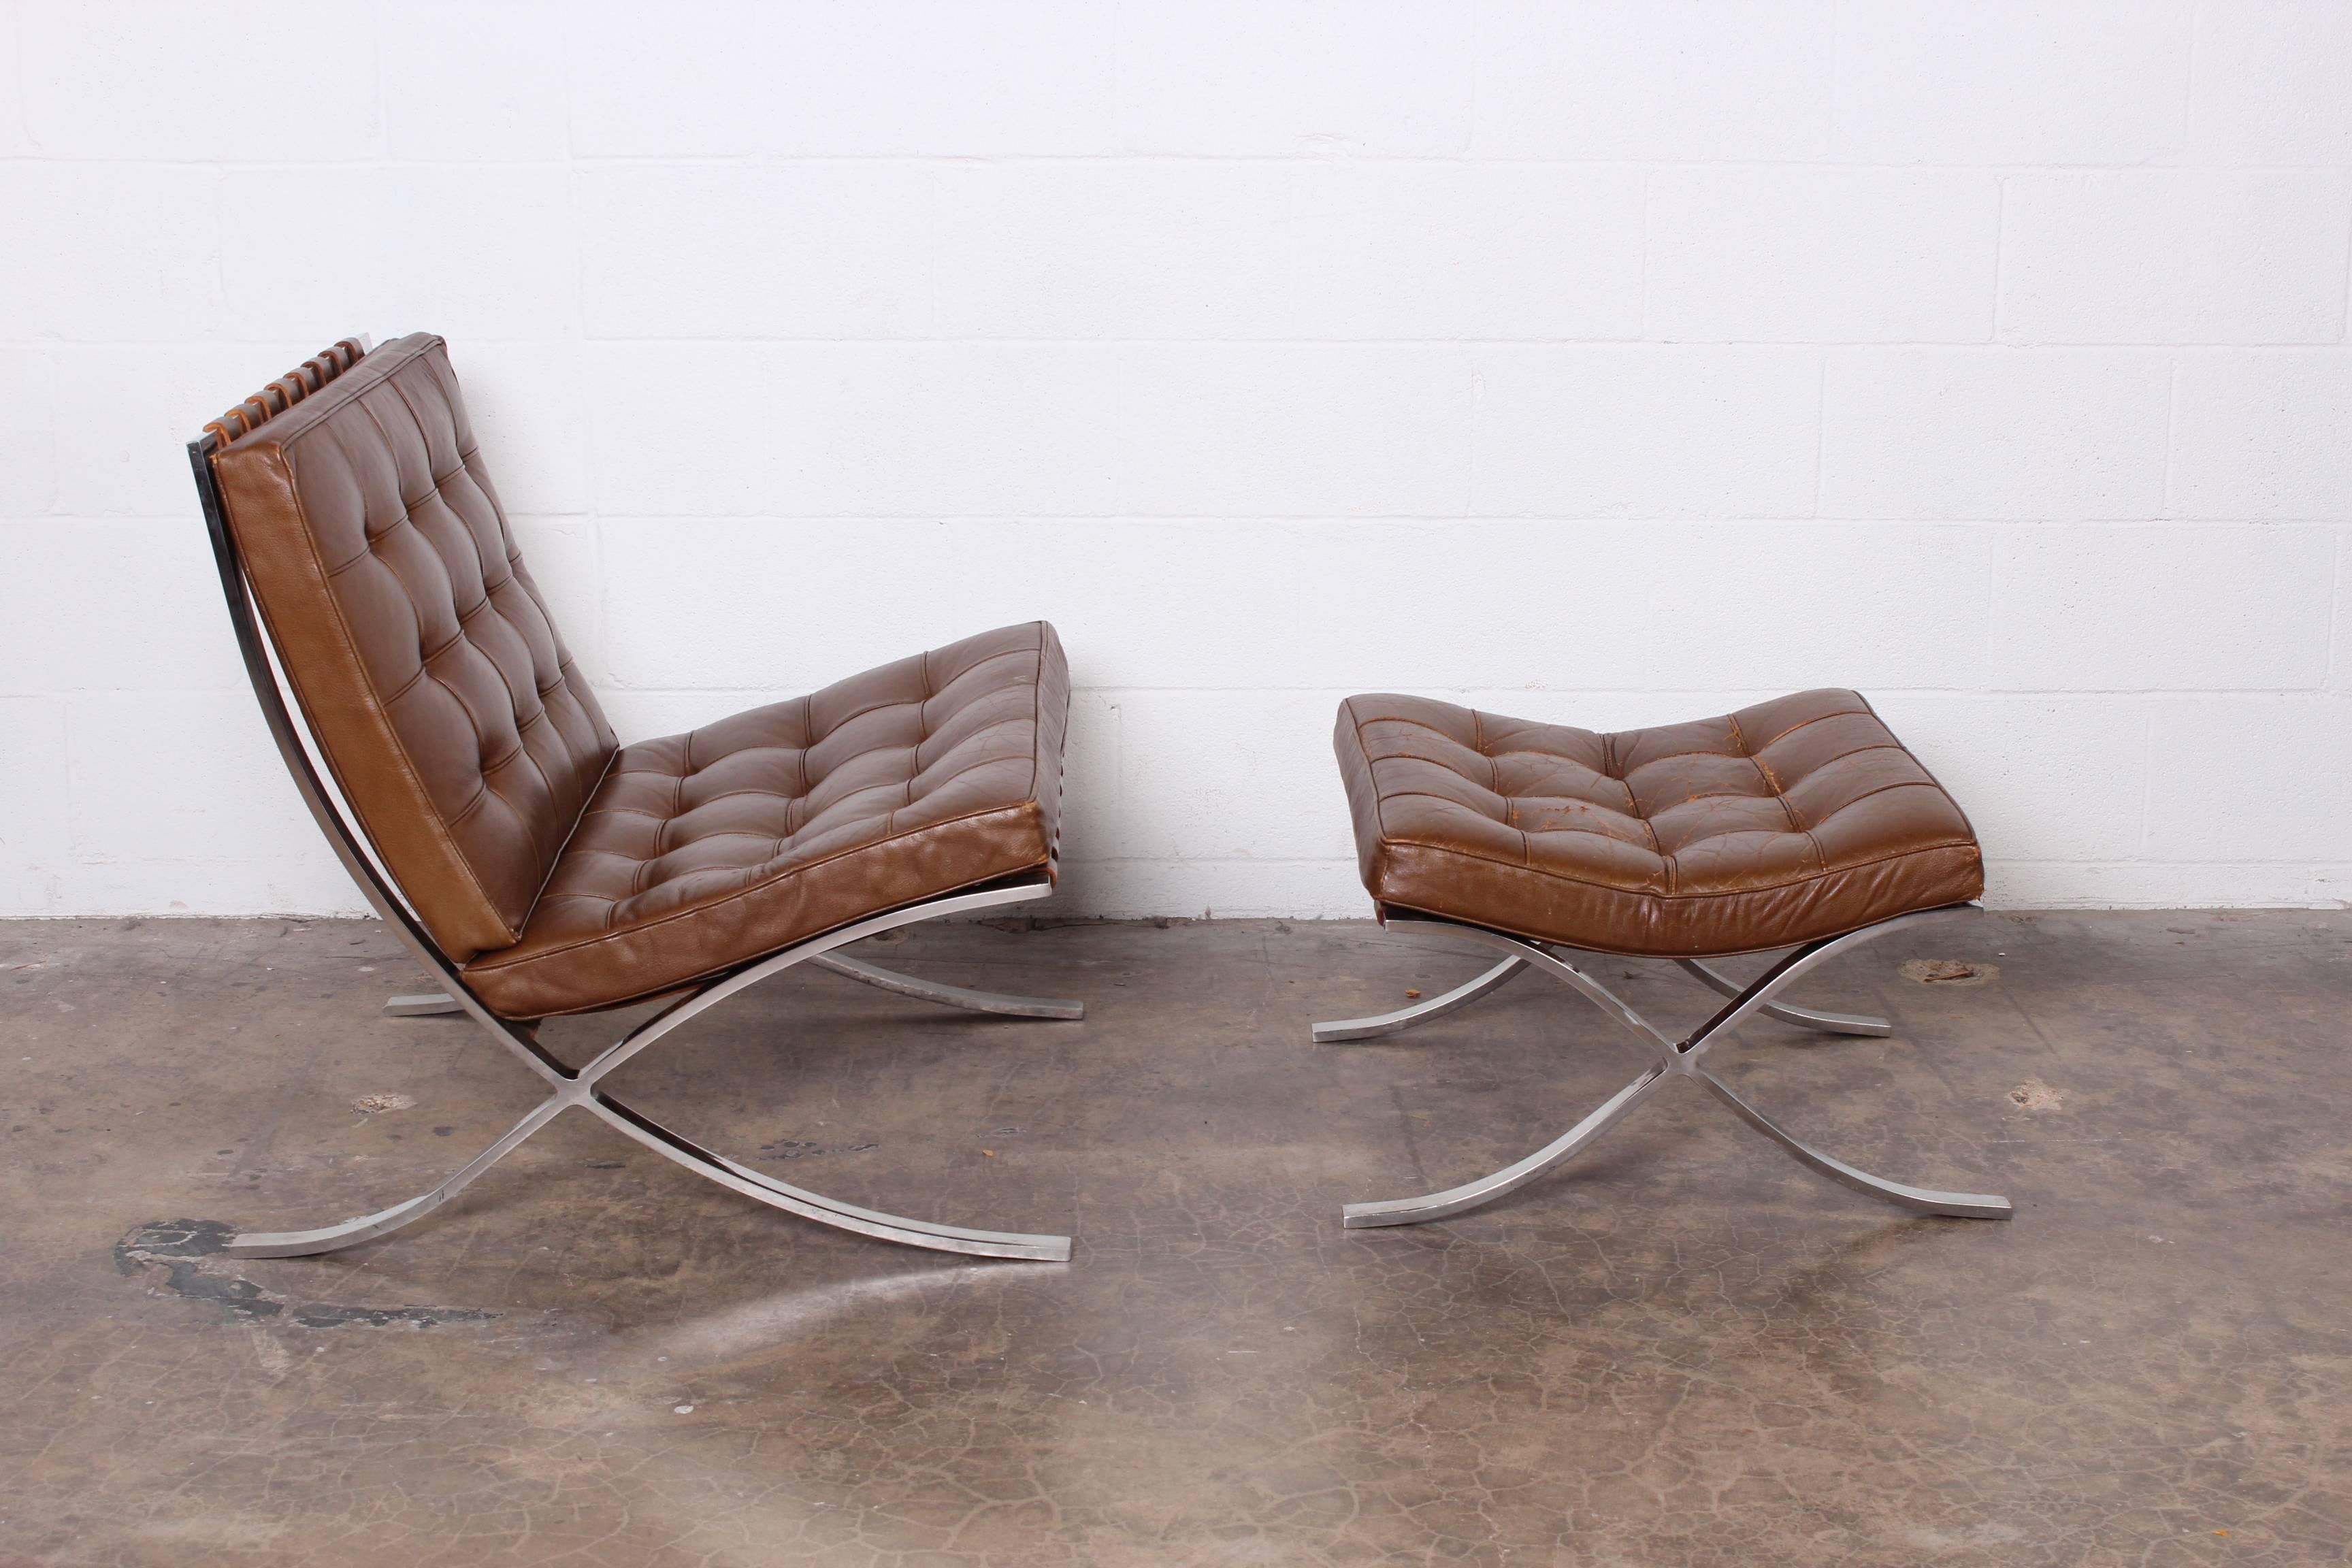 A nicely patinated Barcelona chair and ottoman designed by Mies van der Rohe for Knoll.